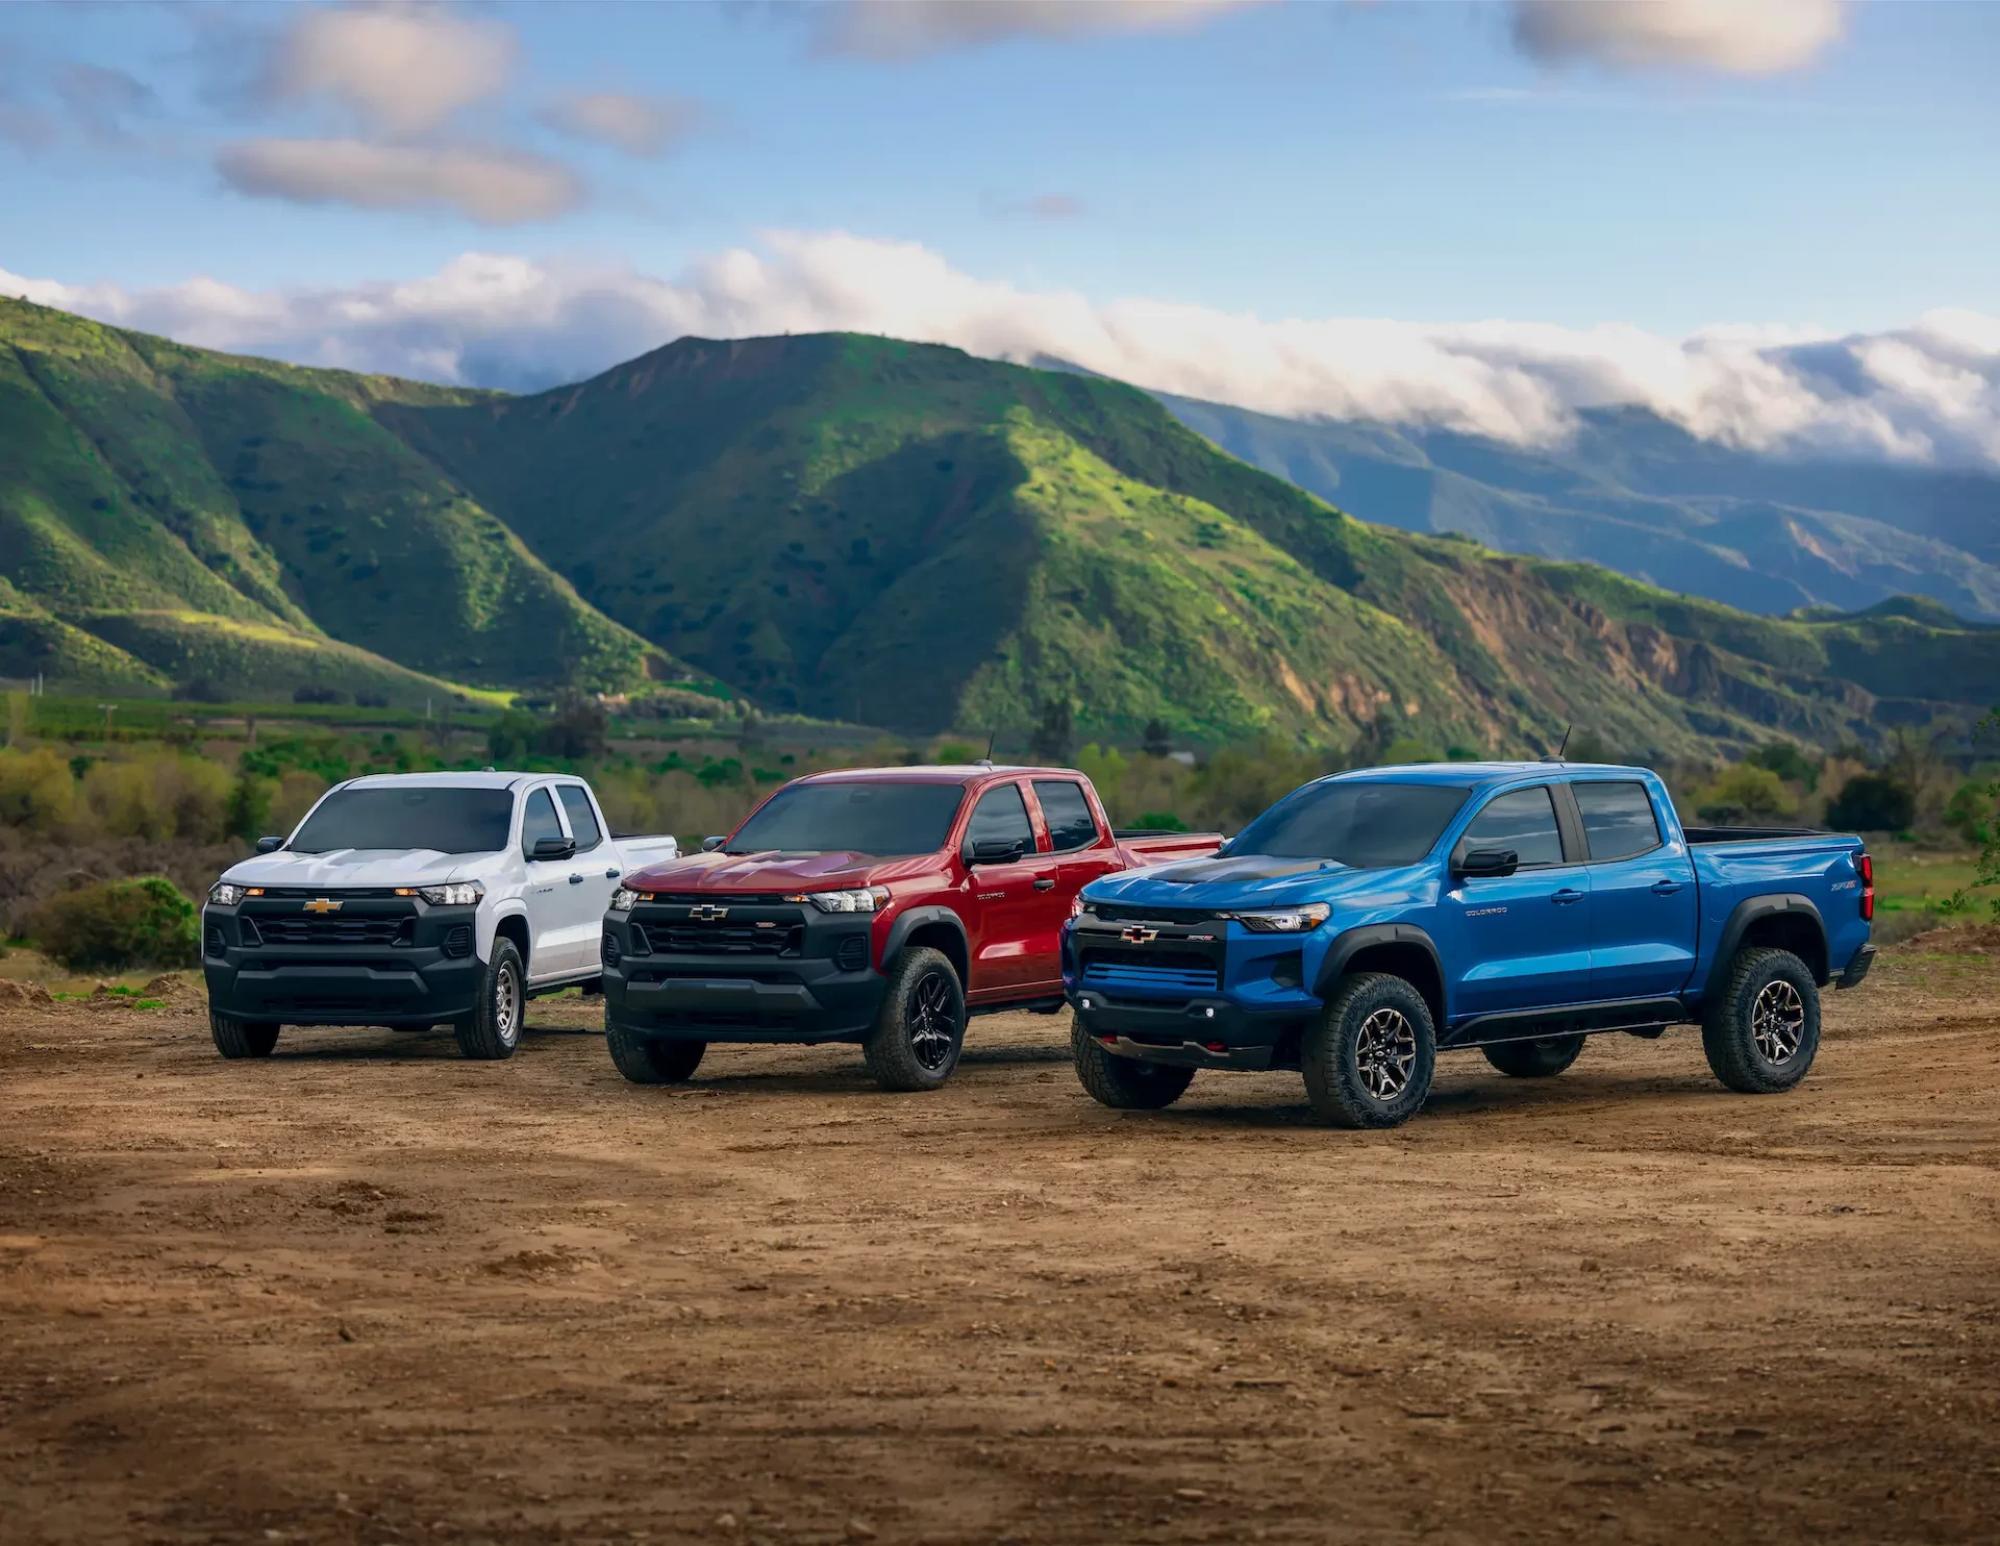 Three Chevrolet pickup trucks, one white, one red and one blue, parked side by side off-road